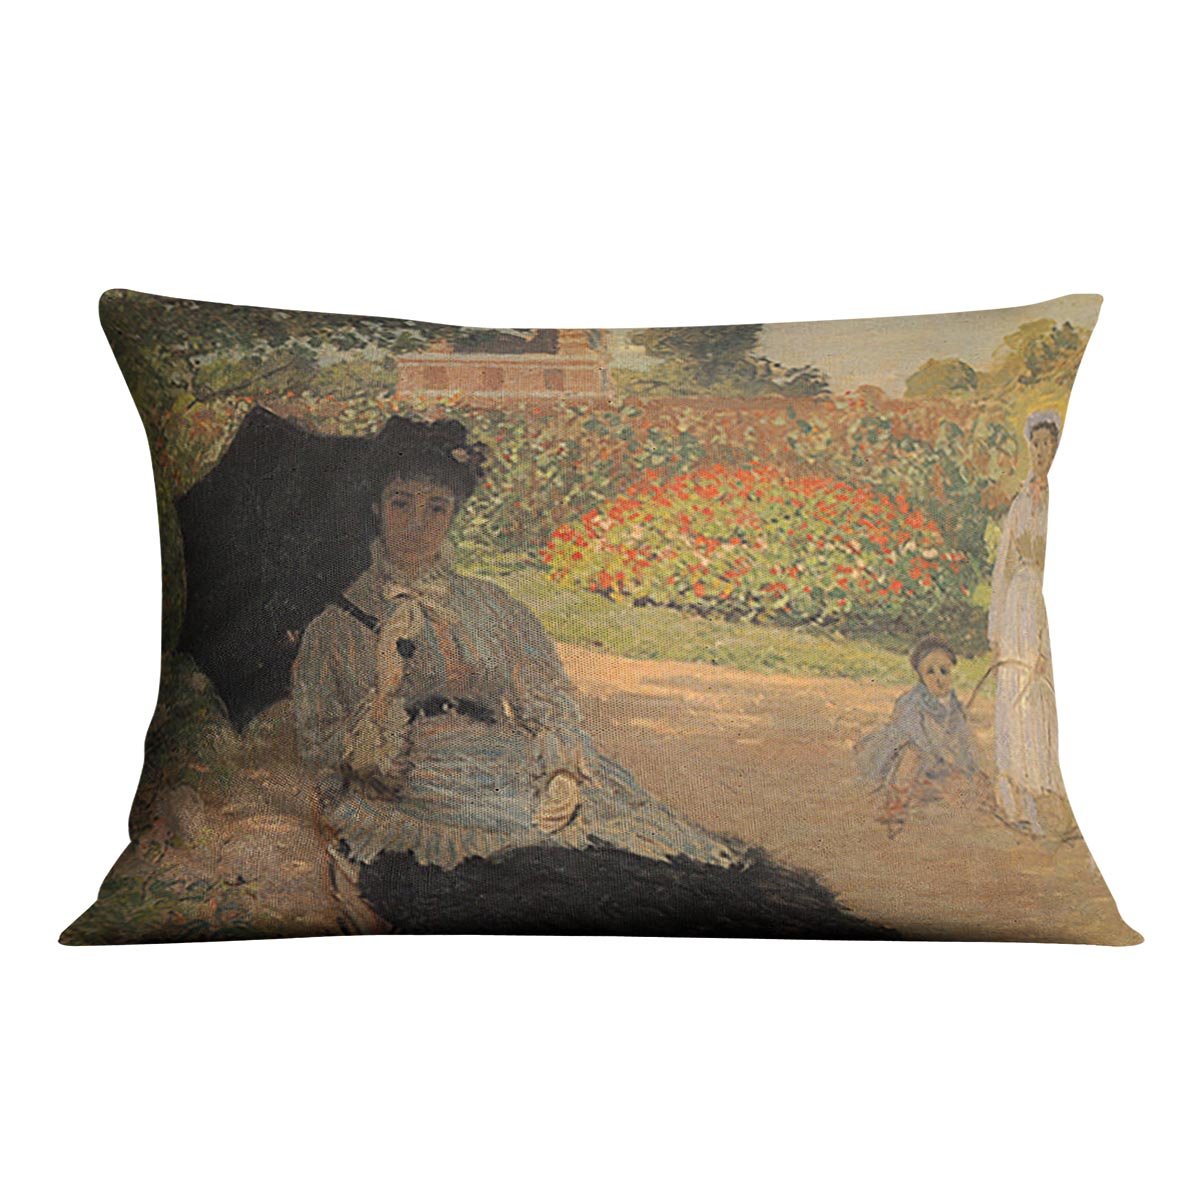 Camille in the garden with Jean and his nanny by Monet Throw Pillow